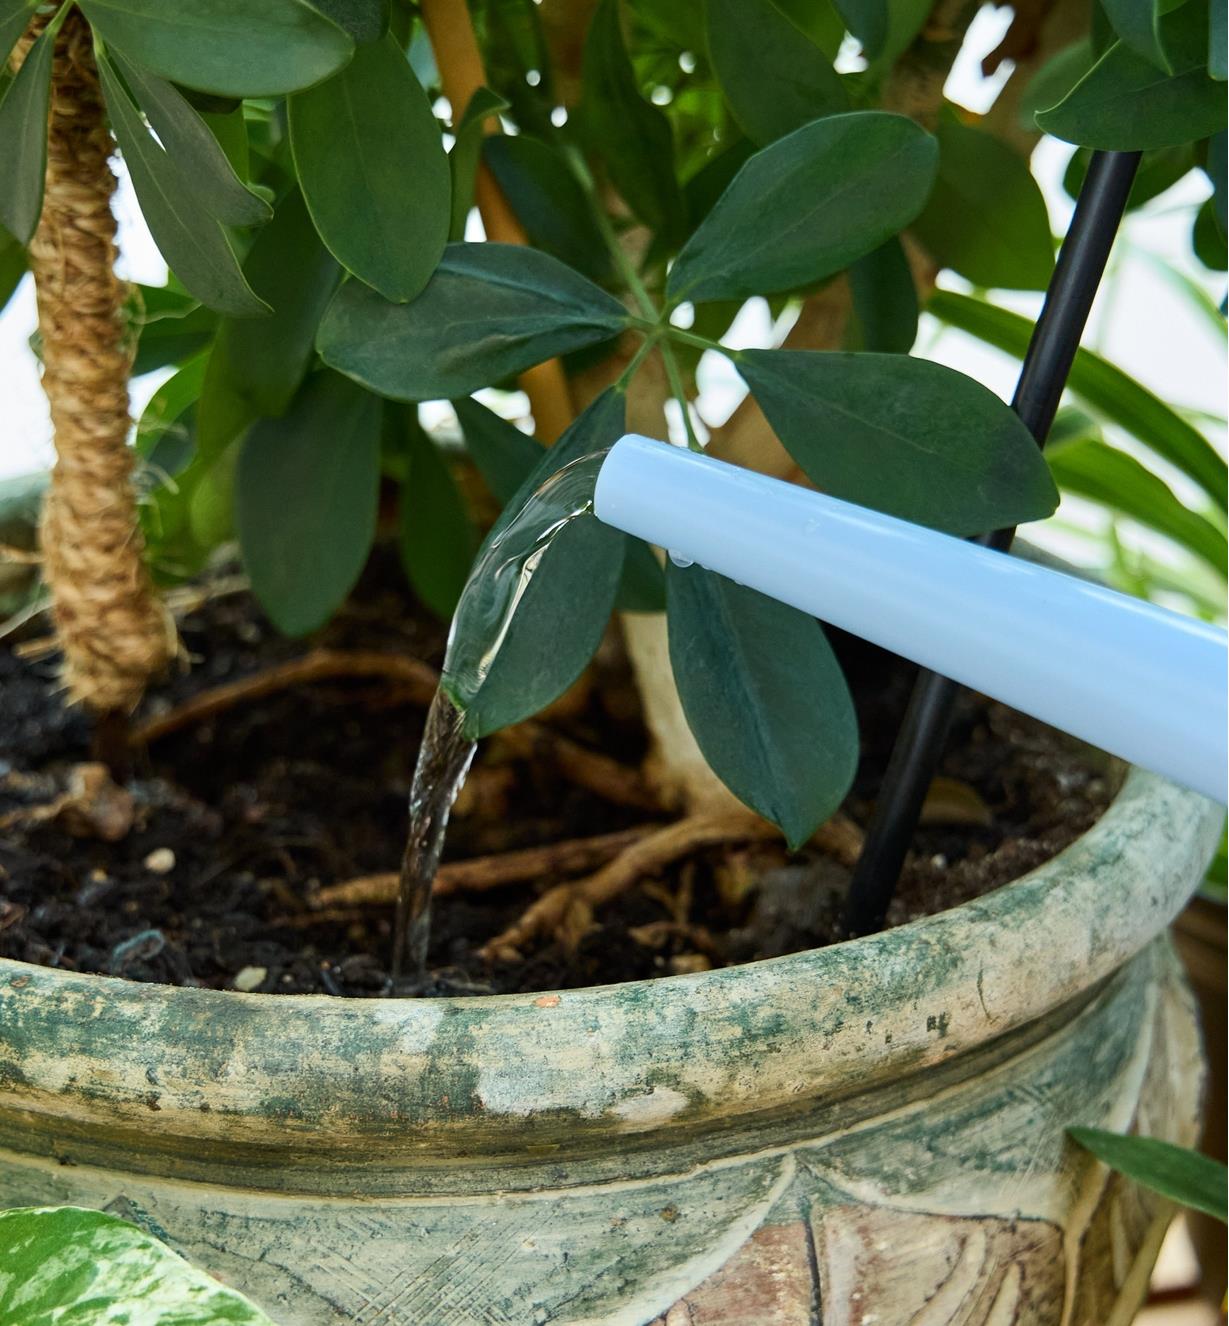 Water flowing from the straight spout on a 4 litre watering can into the soil of a potted plant